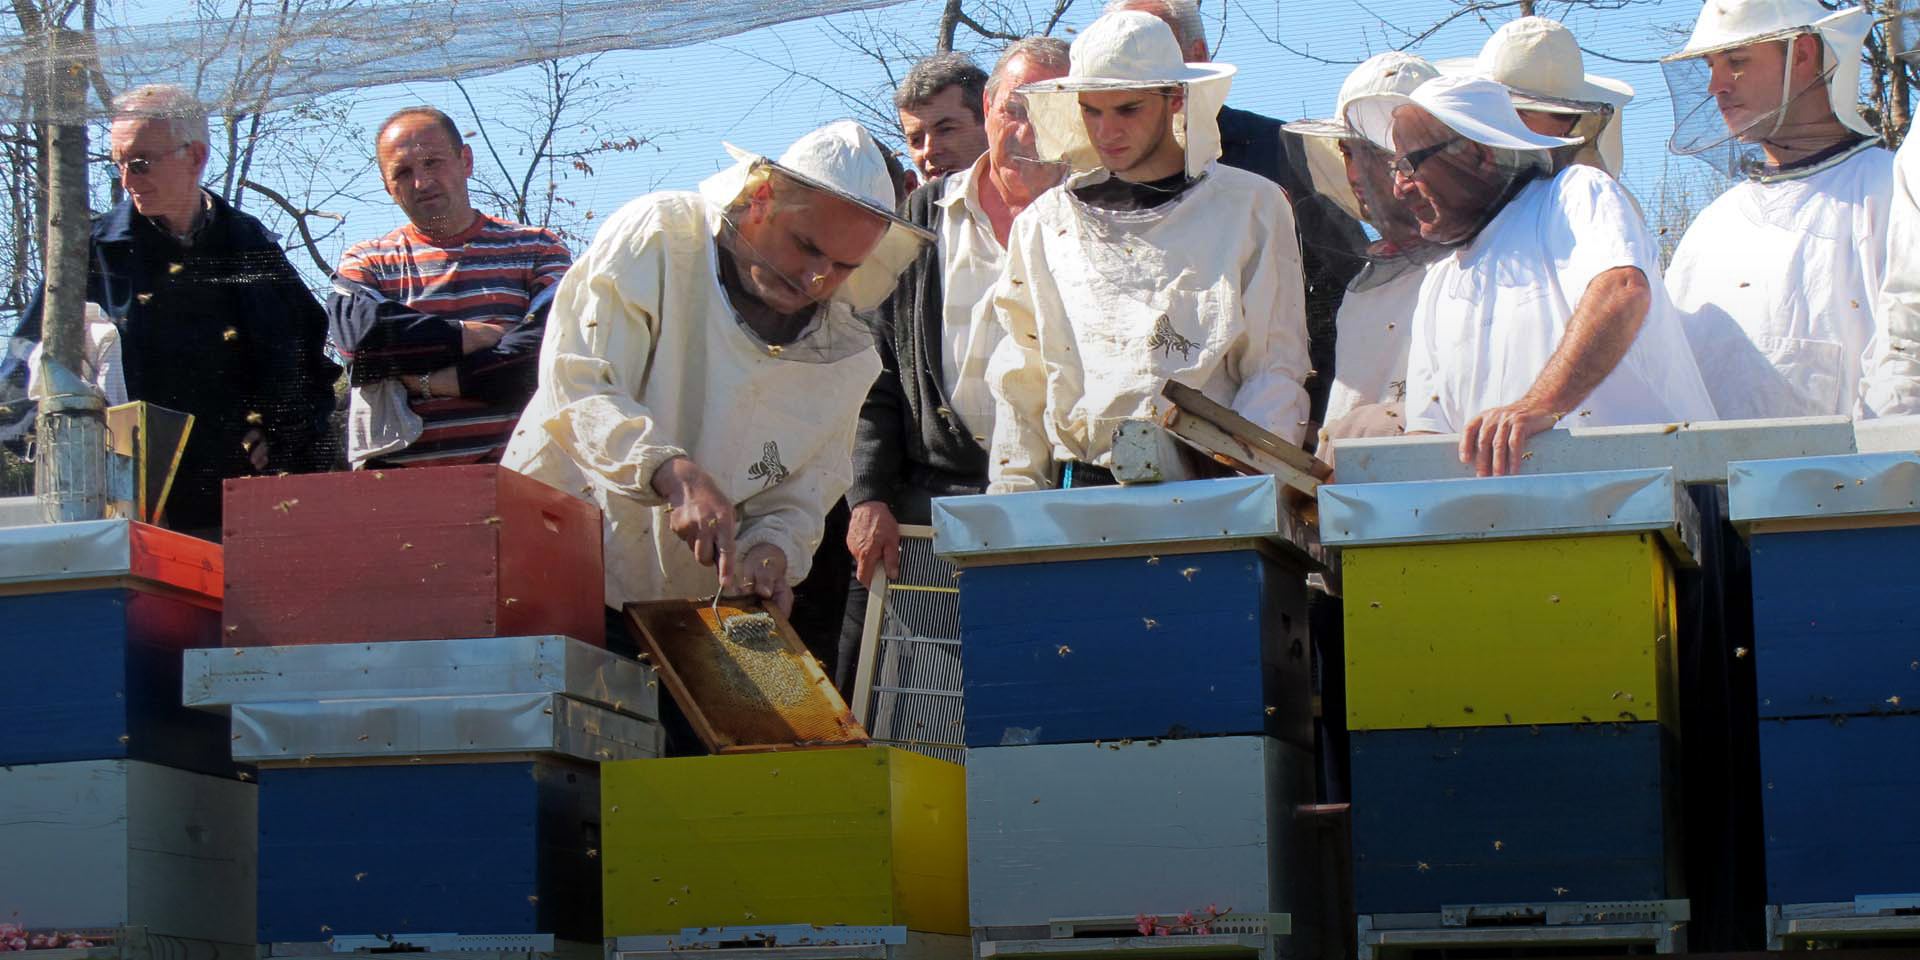 Image of several beekeepers in protective gear inspecting populated bee boxes.